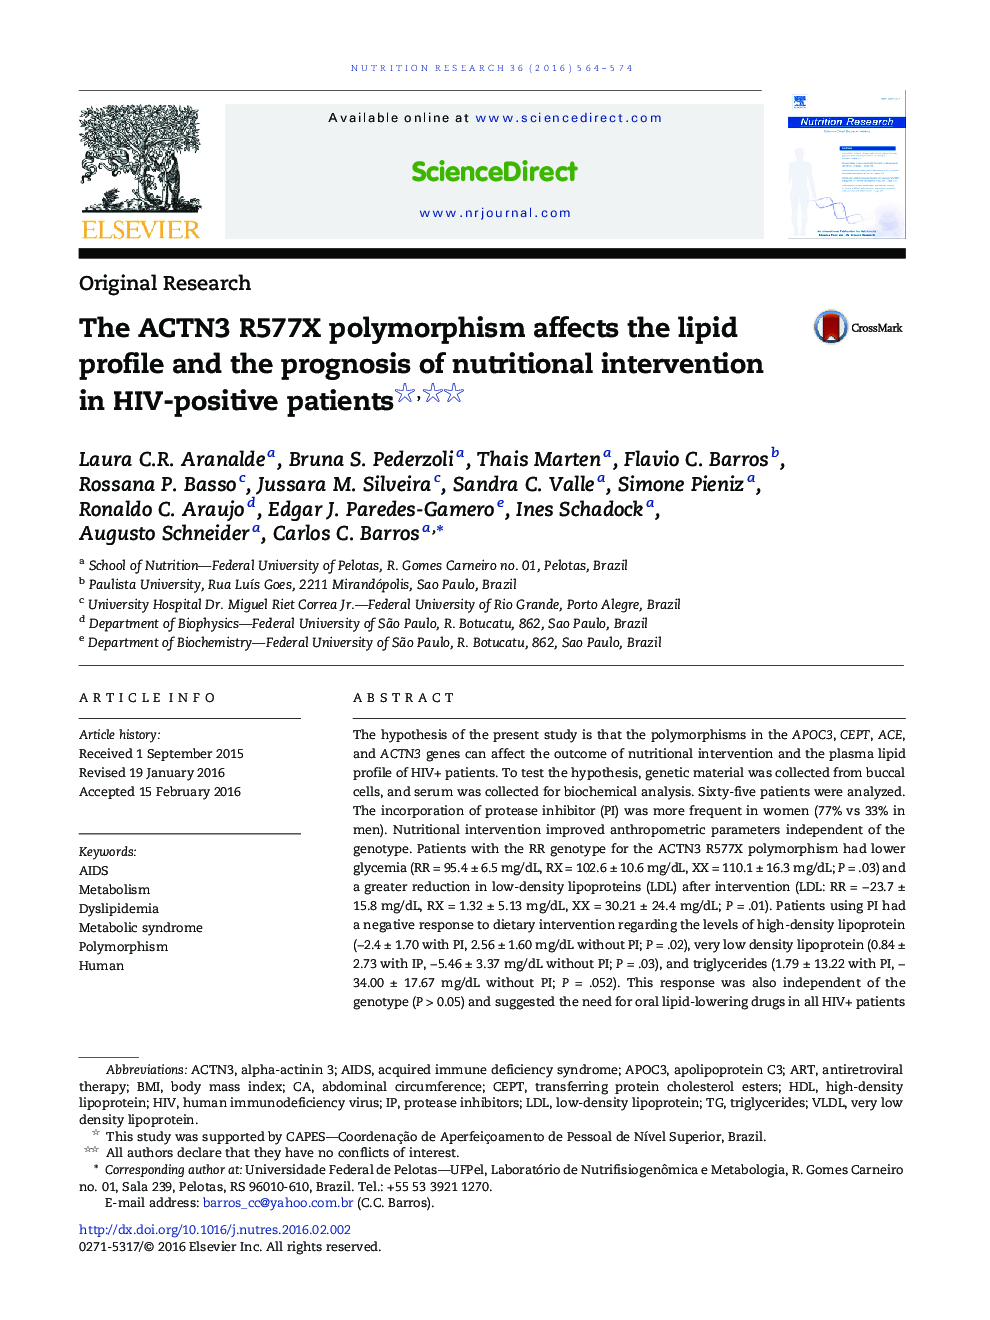 The ACTN3 R577X polymorphism affects the lipid profile and the prognosis of nutritional intervention in HIV-positive patients 